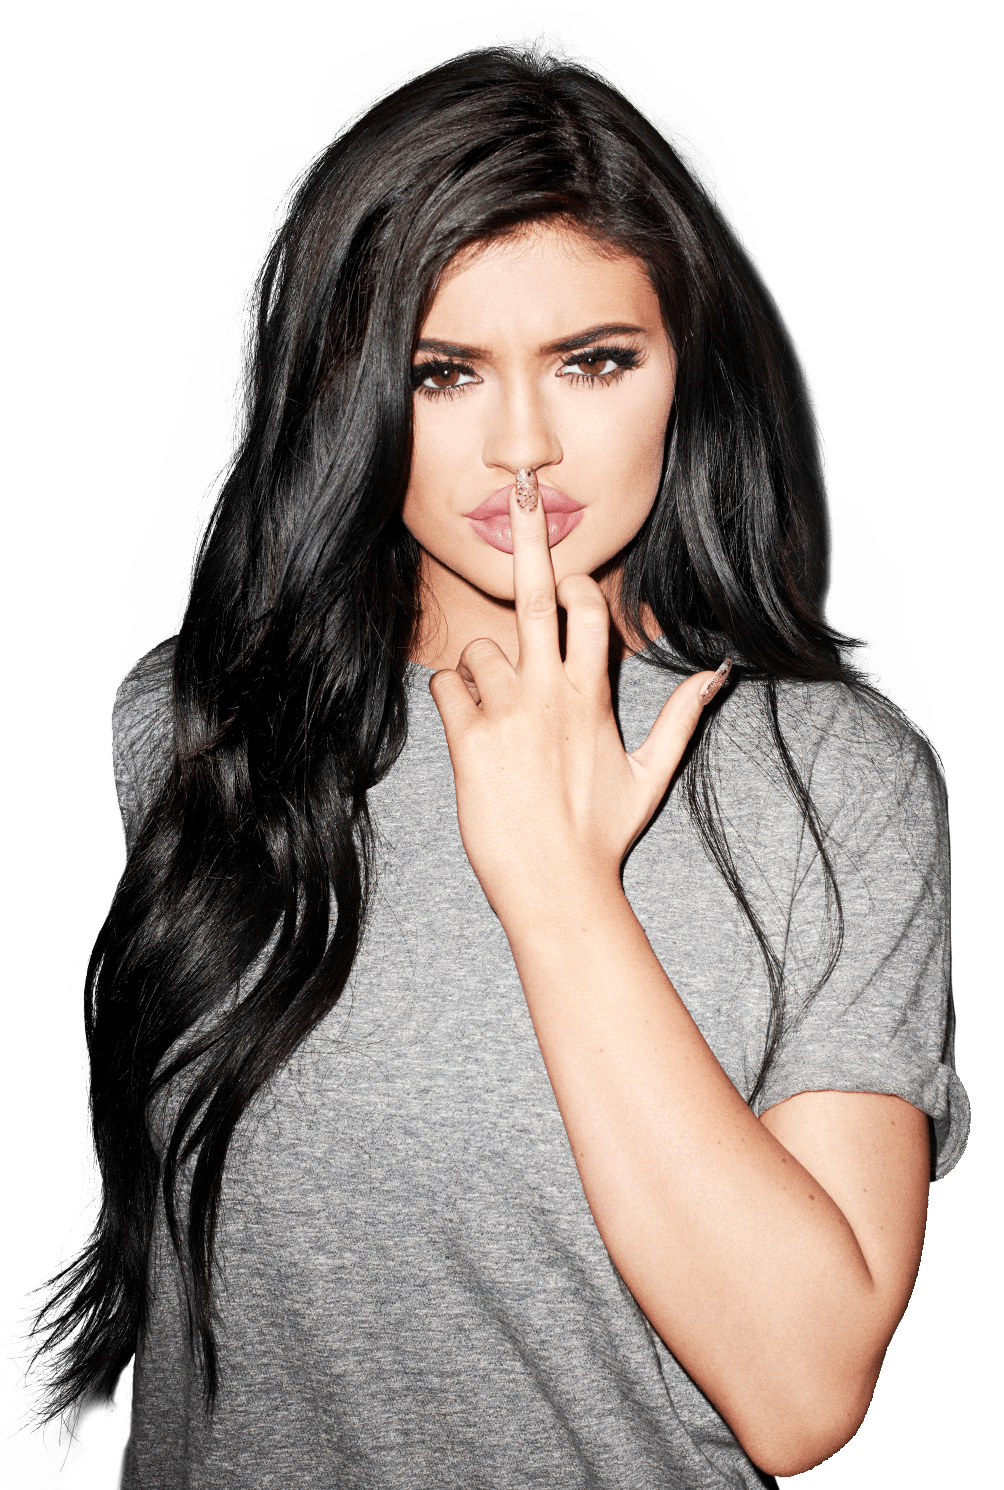 Kylie Jenner PNG Free Image